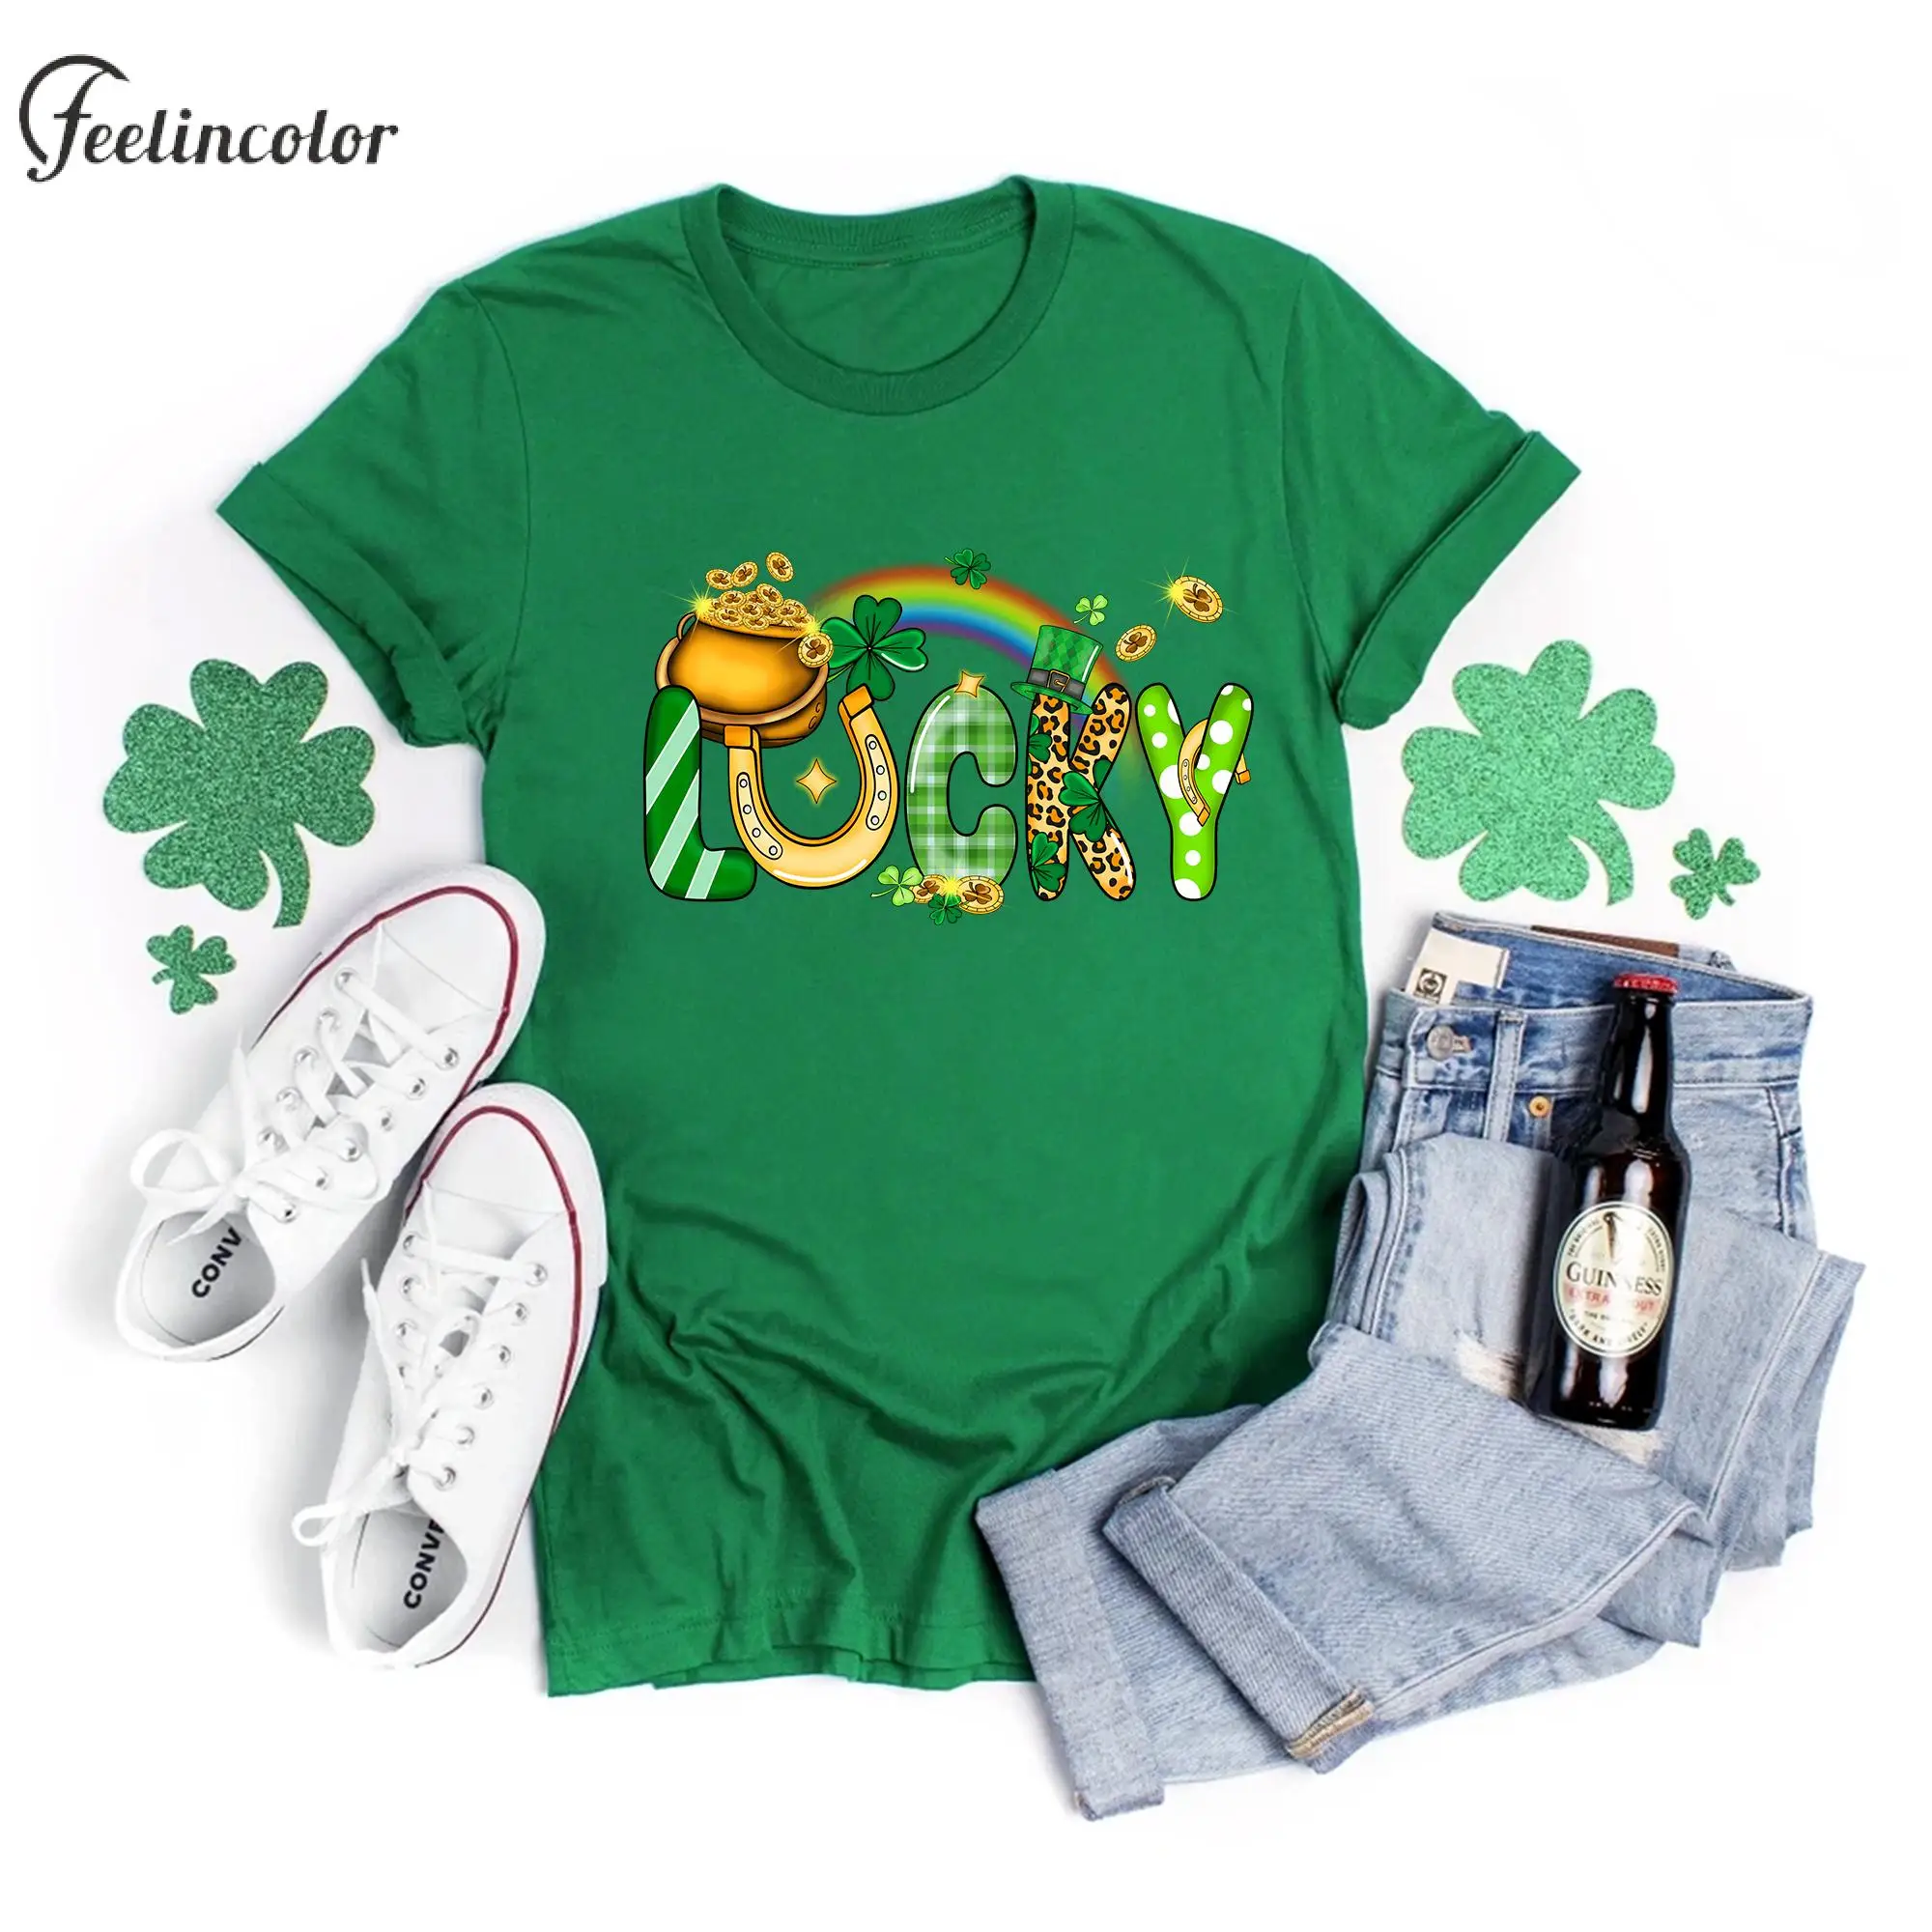 

St. Patrick's Day T-shirts Adult Lucky T-shirt Women Men Casual Streetwear Clover Printed Top O-neck Tee Holiday Party Clothes